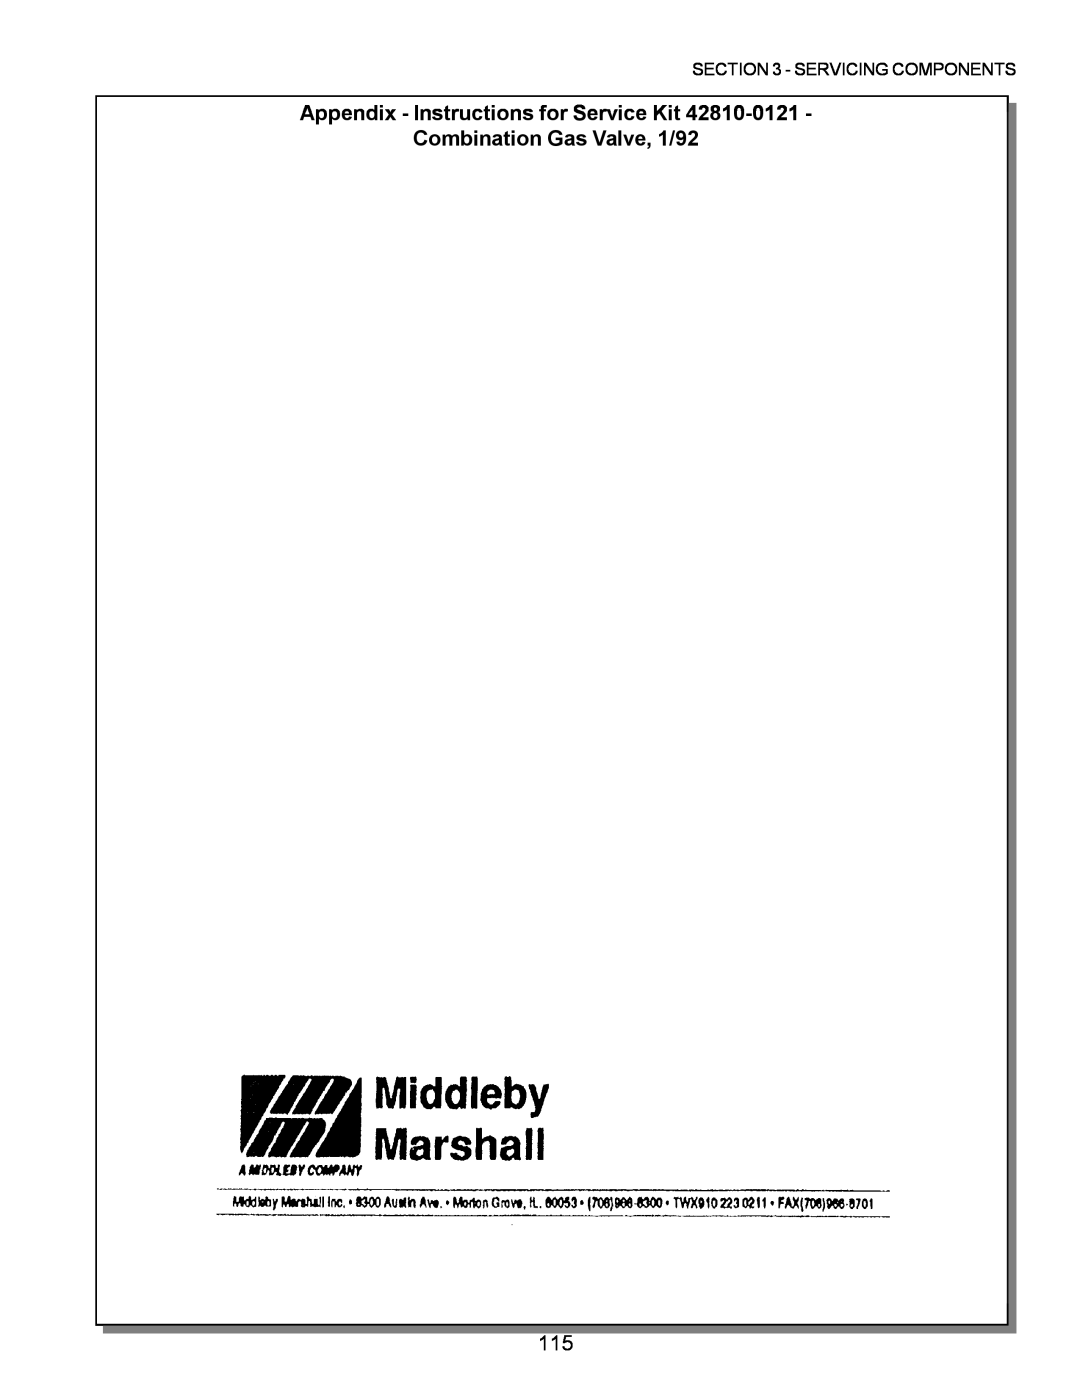 Middleby Marshall PS200, PS570 Appendix - Instructions for Service Kit Combination Gas Valve, 1/92, Servicing Components 